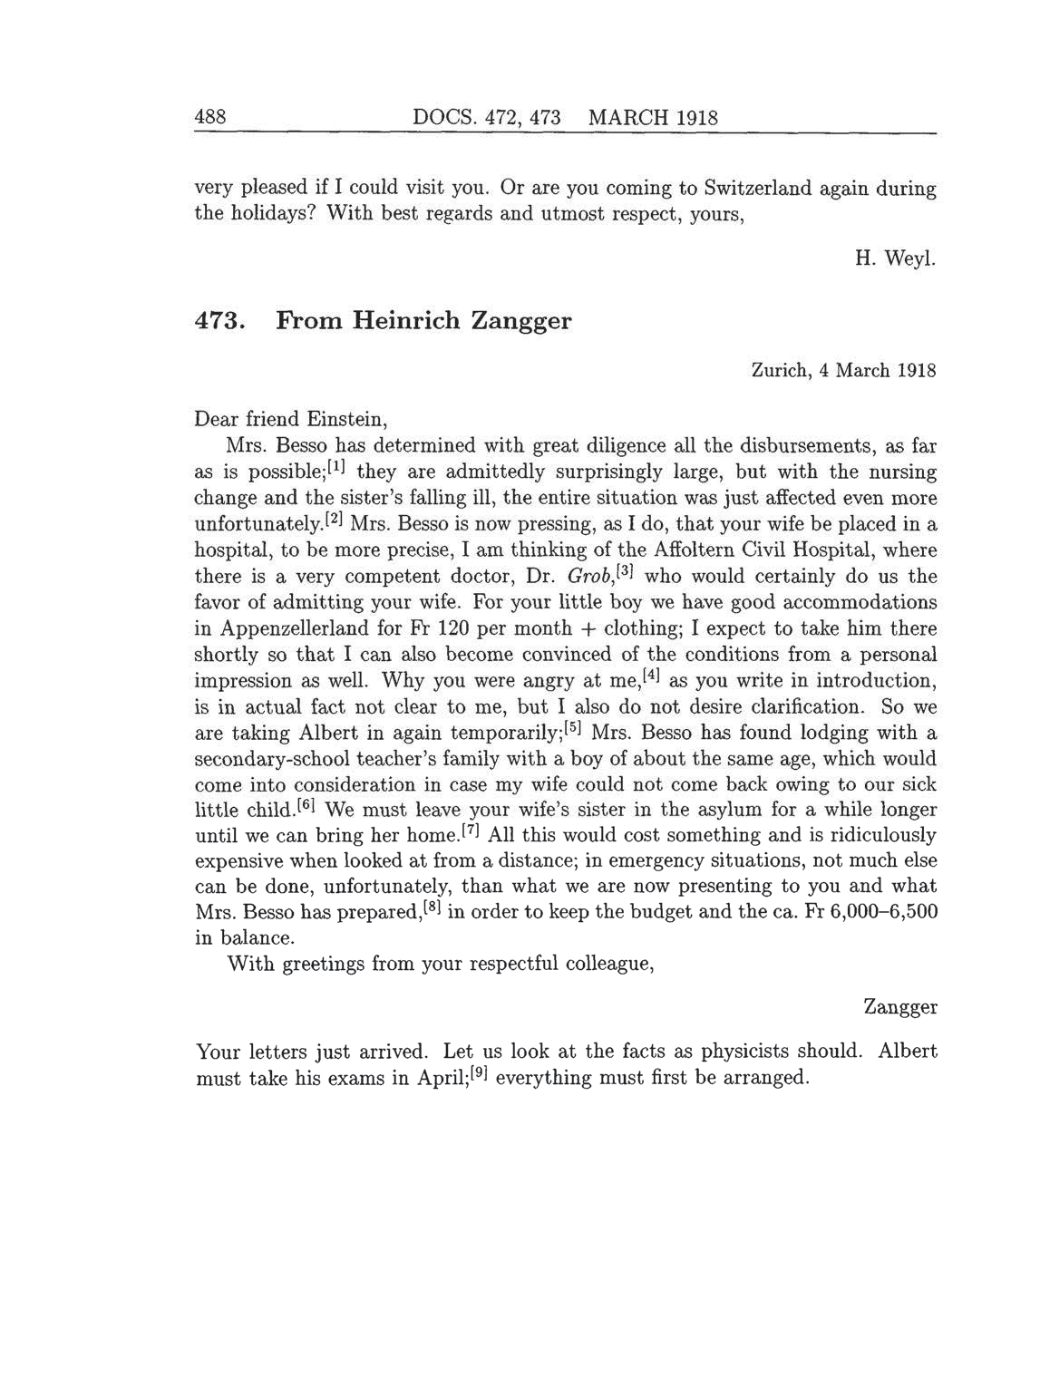 Volume 8: The Berlin Years: Correspondence, 1914-1918 (English translation supplement) page 488